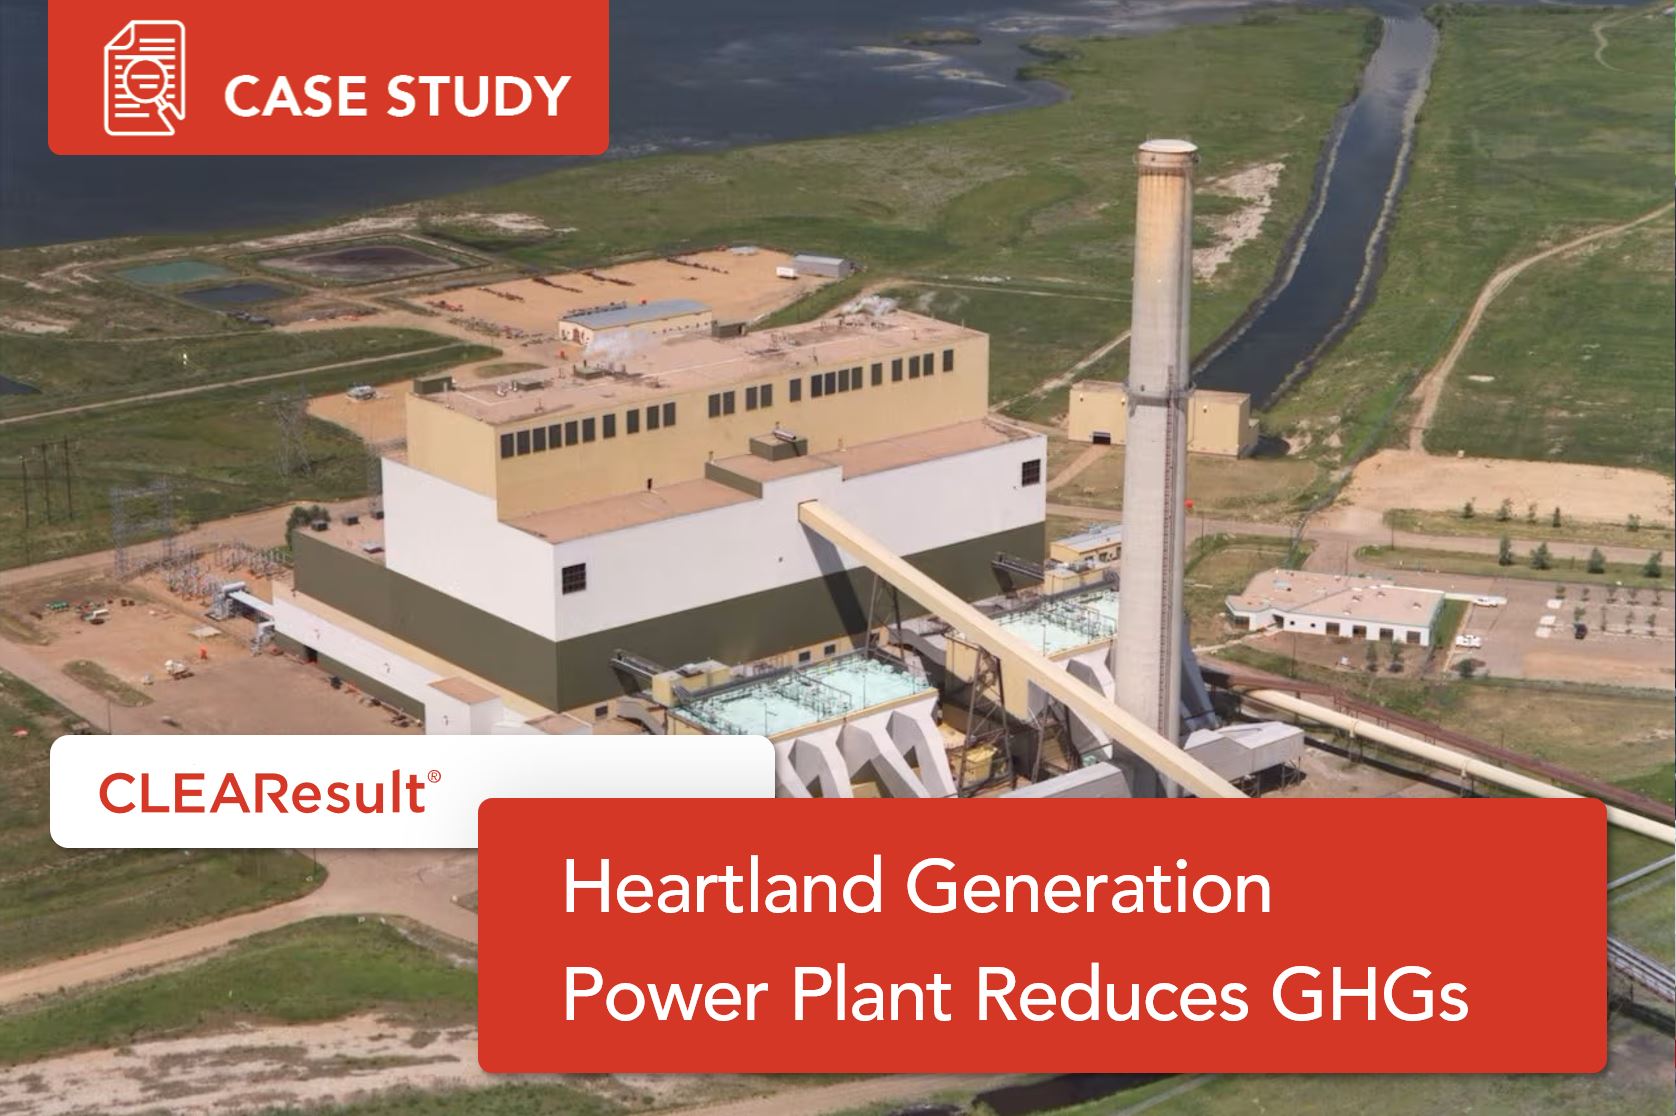 Heartland Generation Power Plant Reduces GHGs